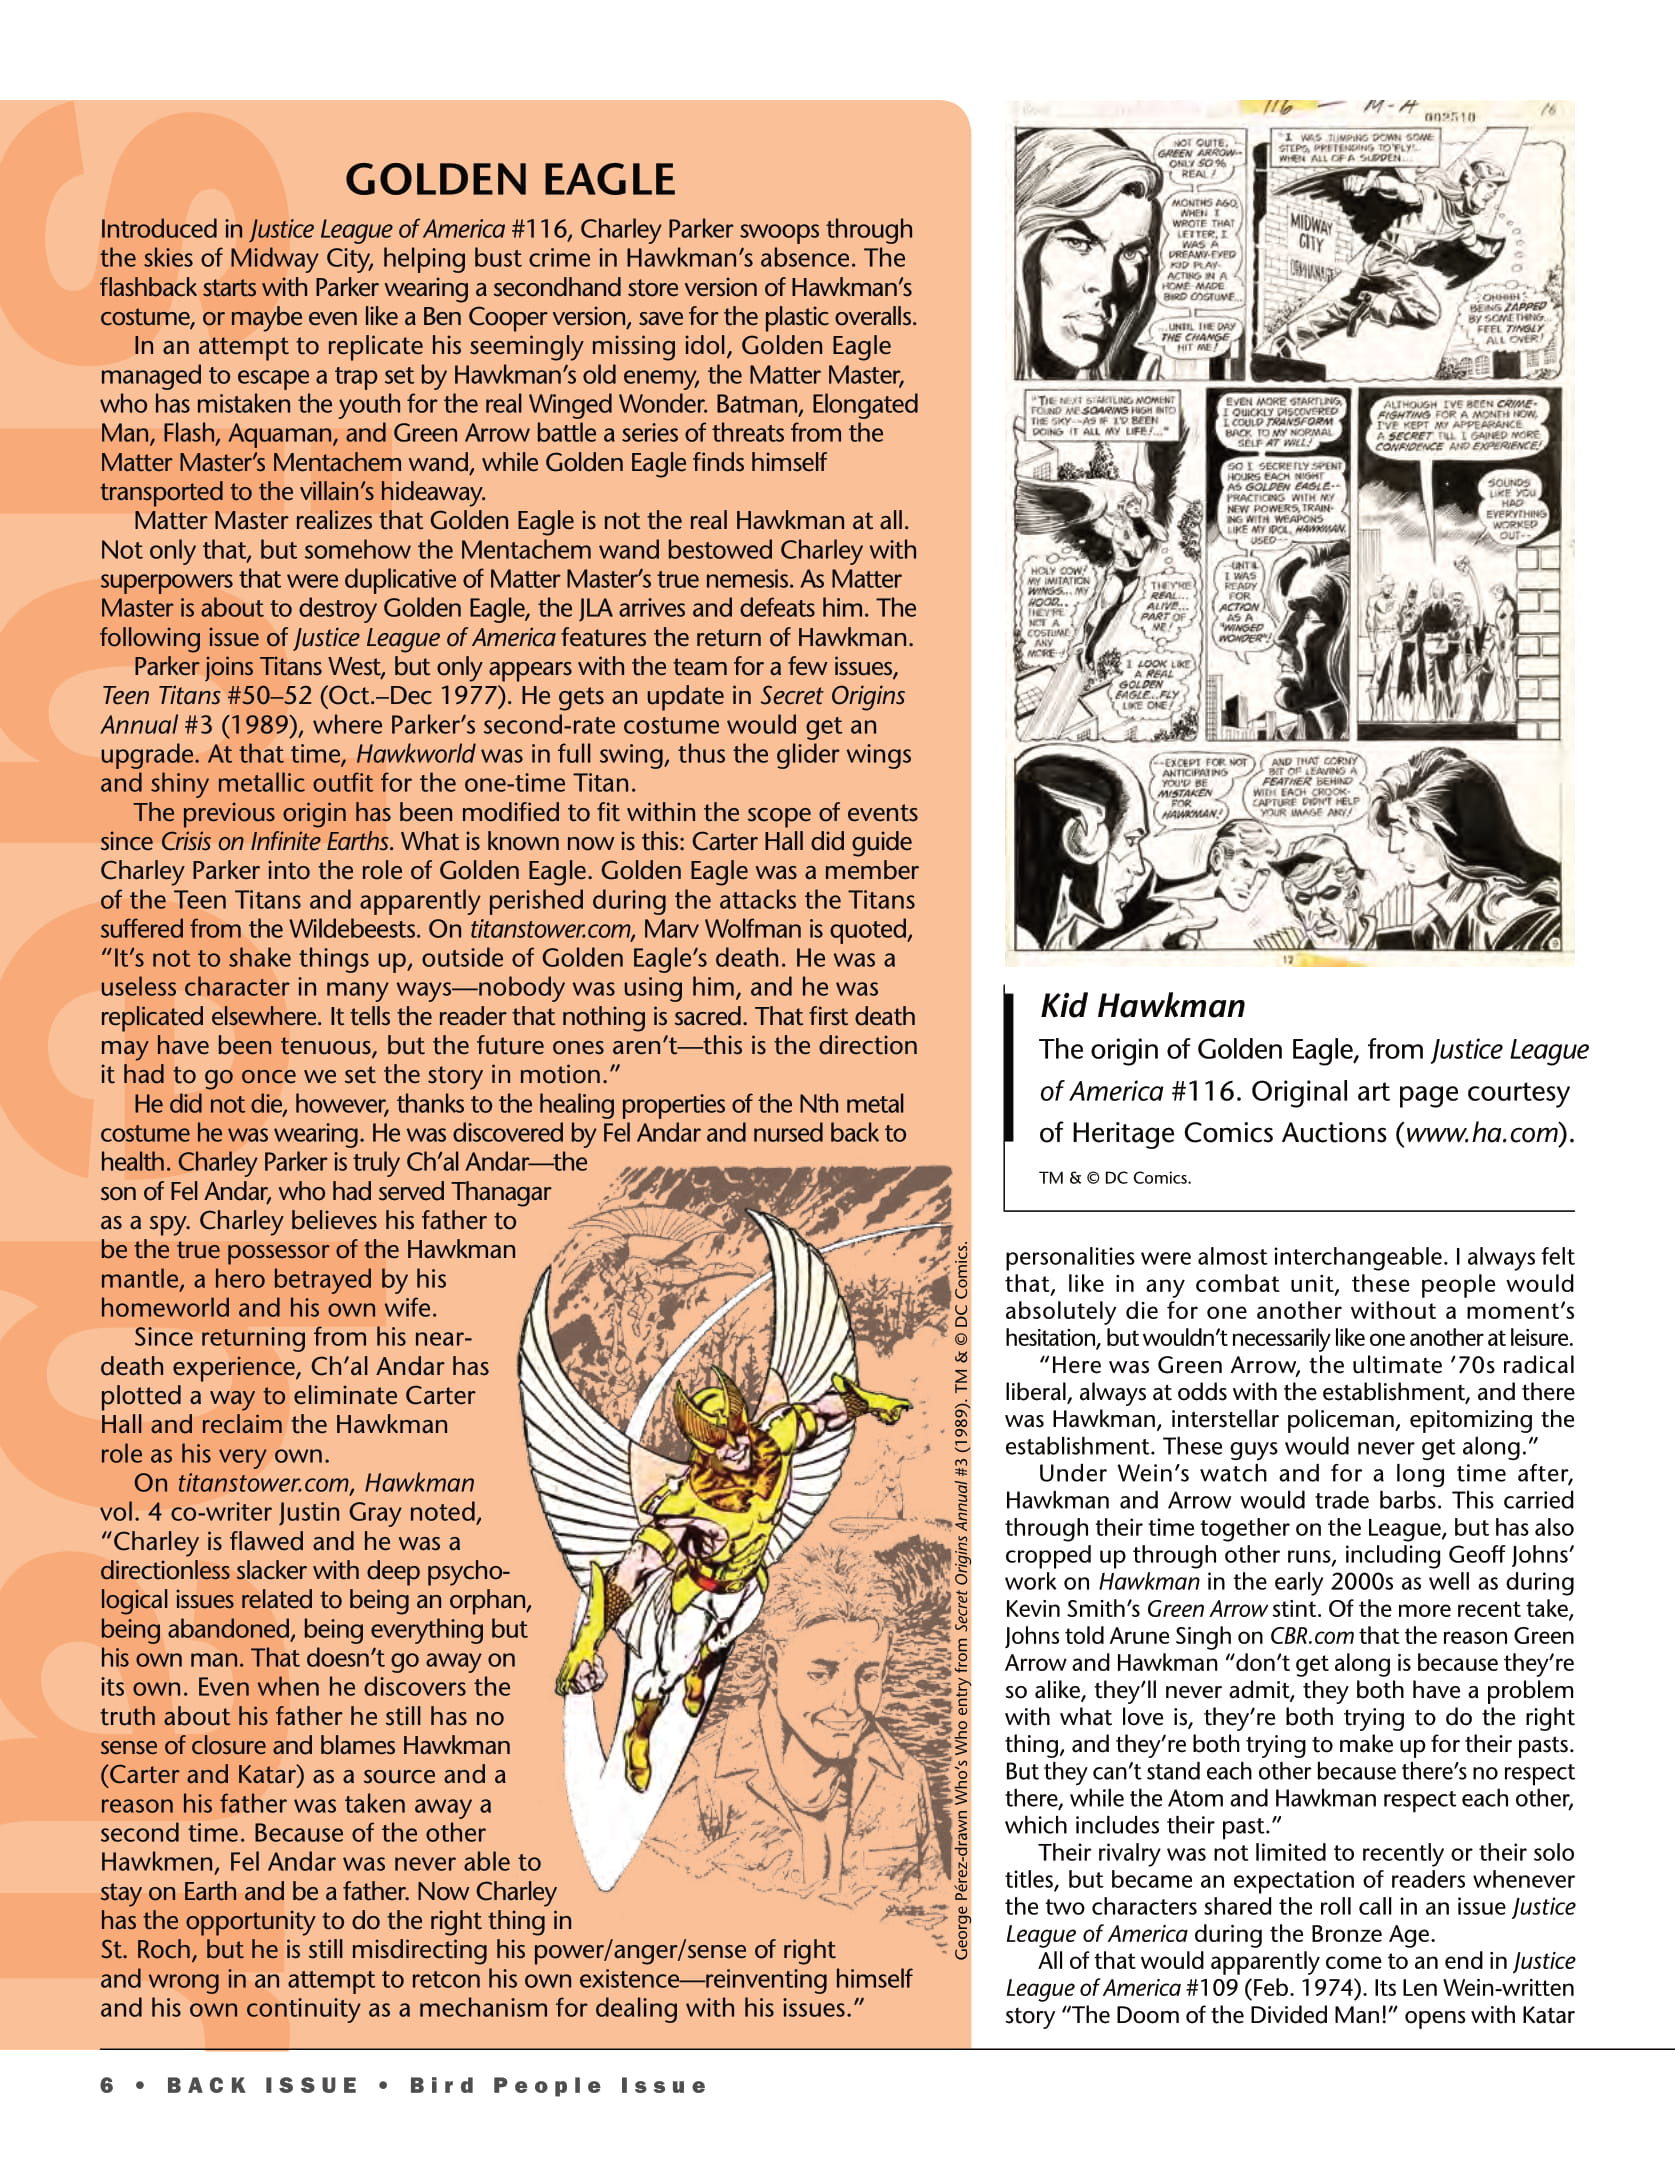 Read online Back Issue comic -  Issue #97 - 8